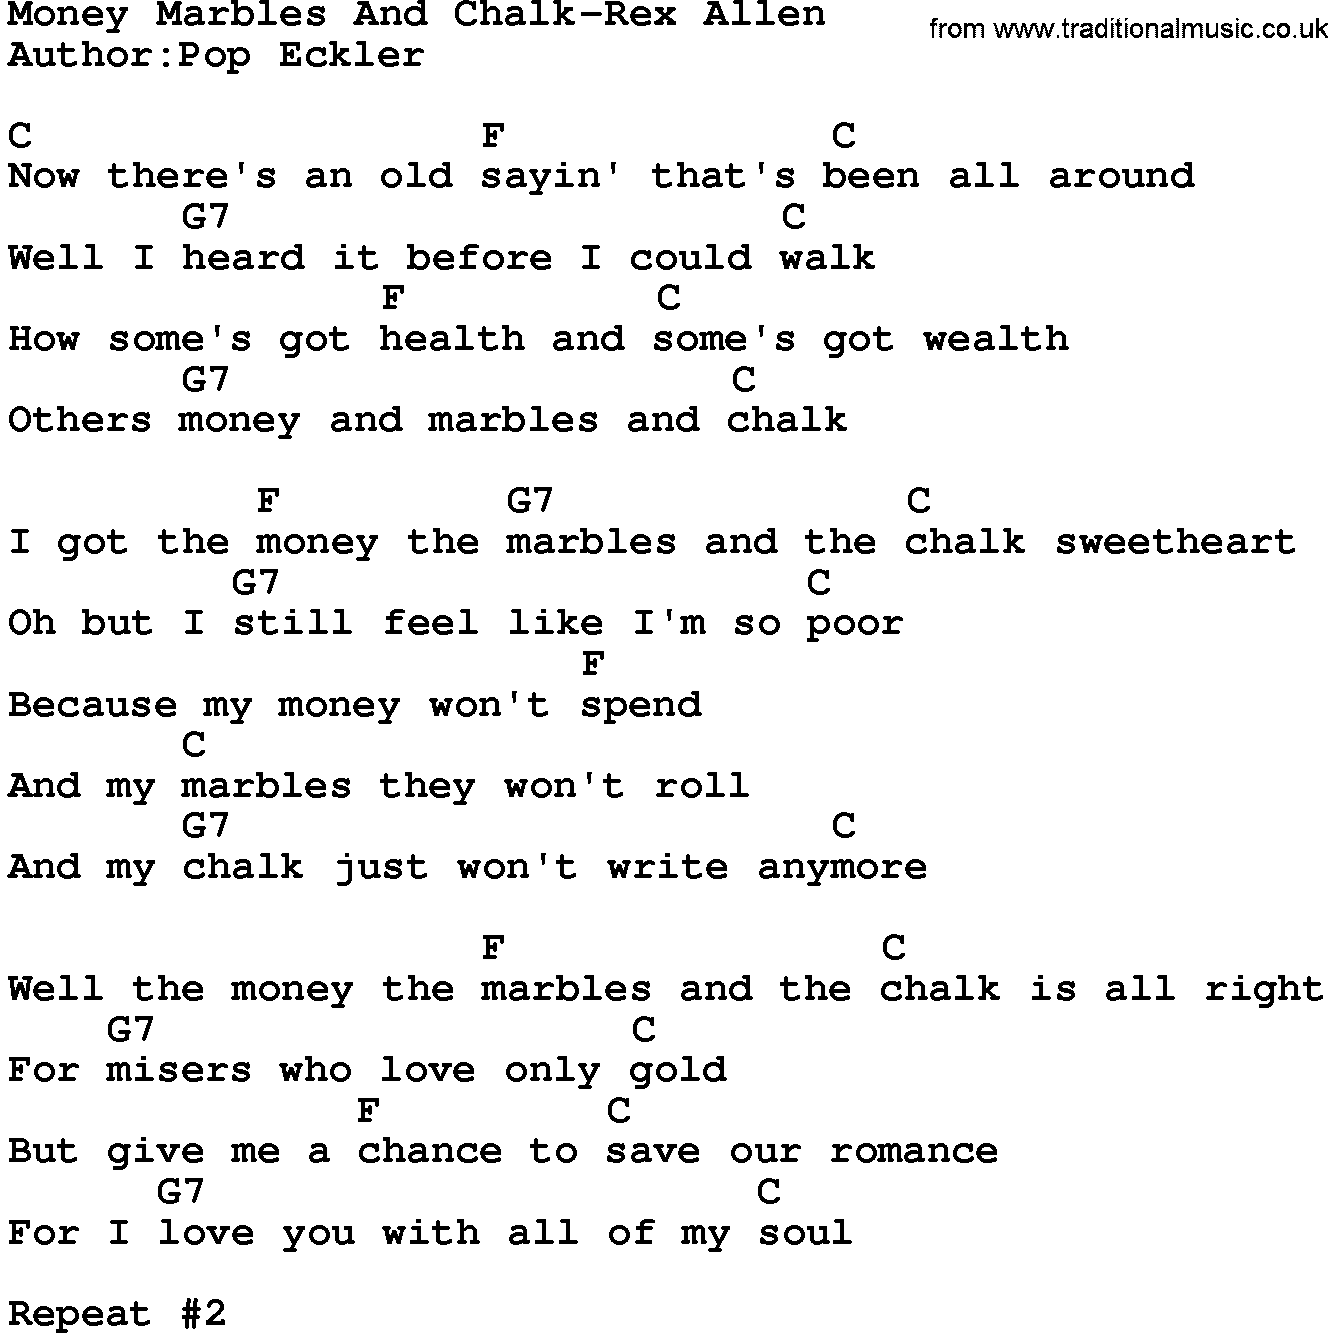 Country music song: Money Marbles And Chalk-Rex Allen lyrics and chords